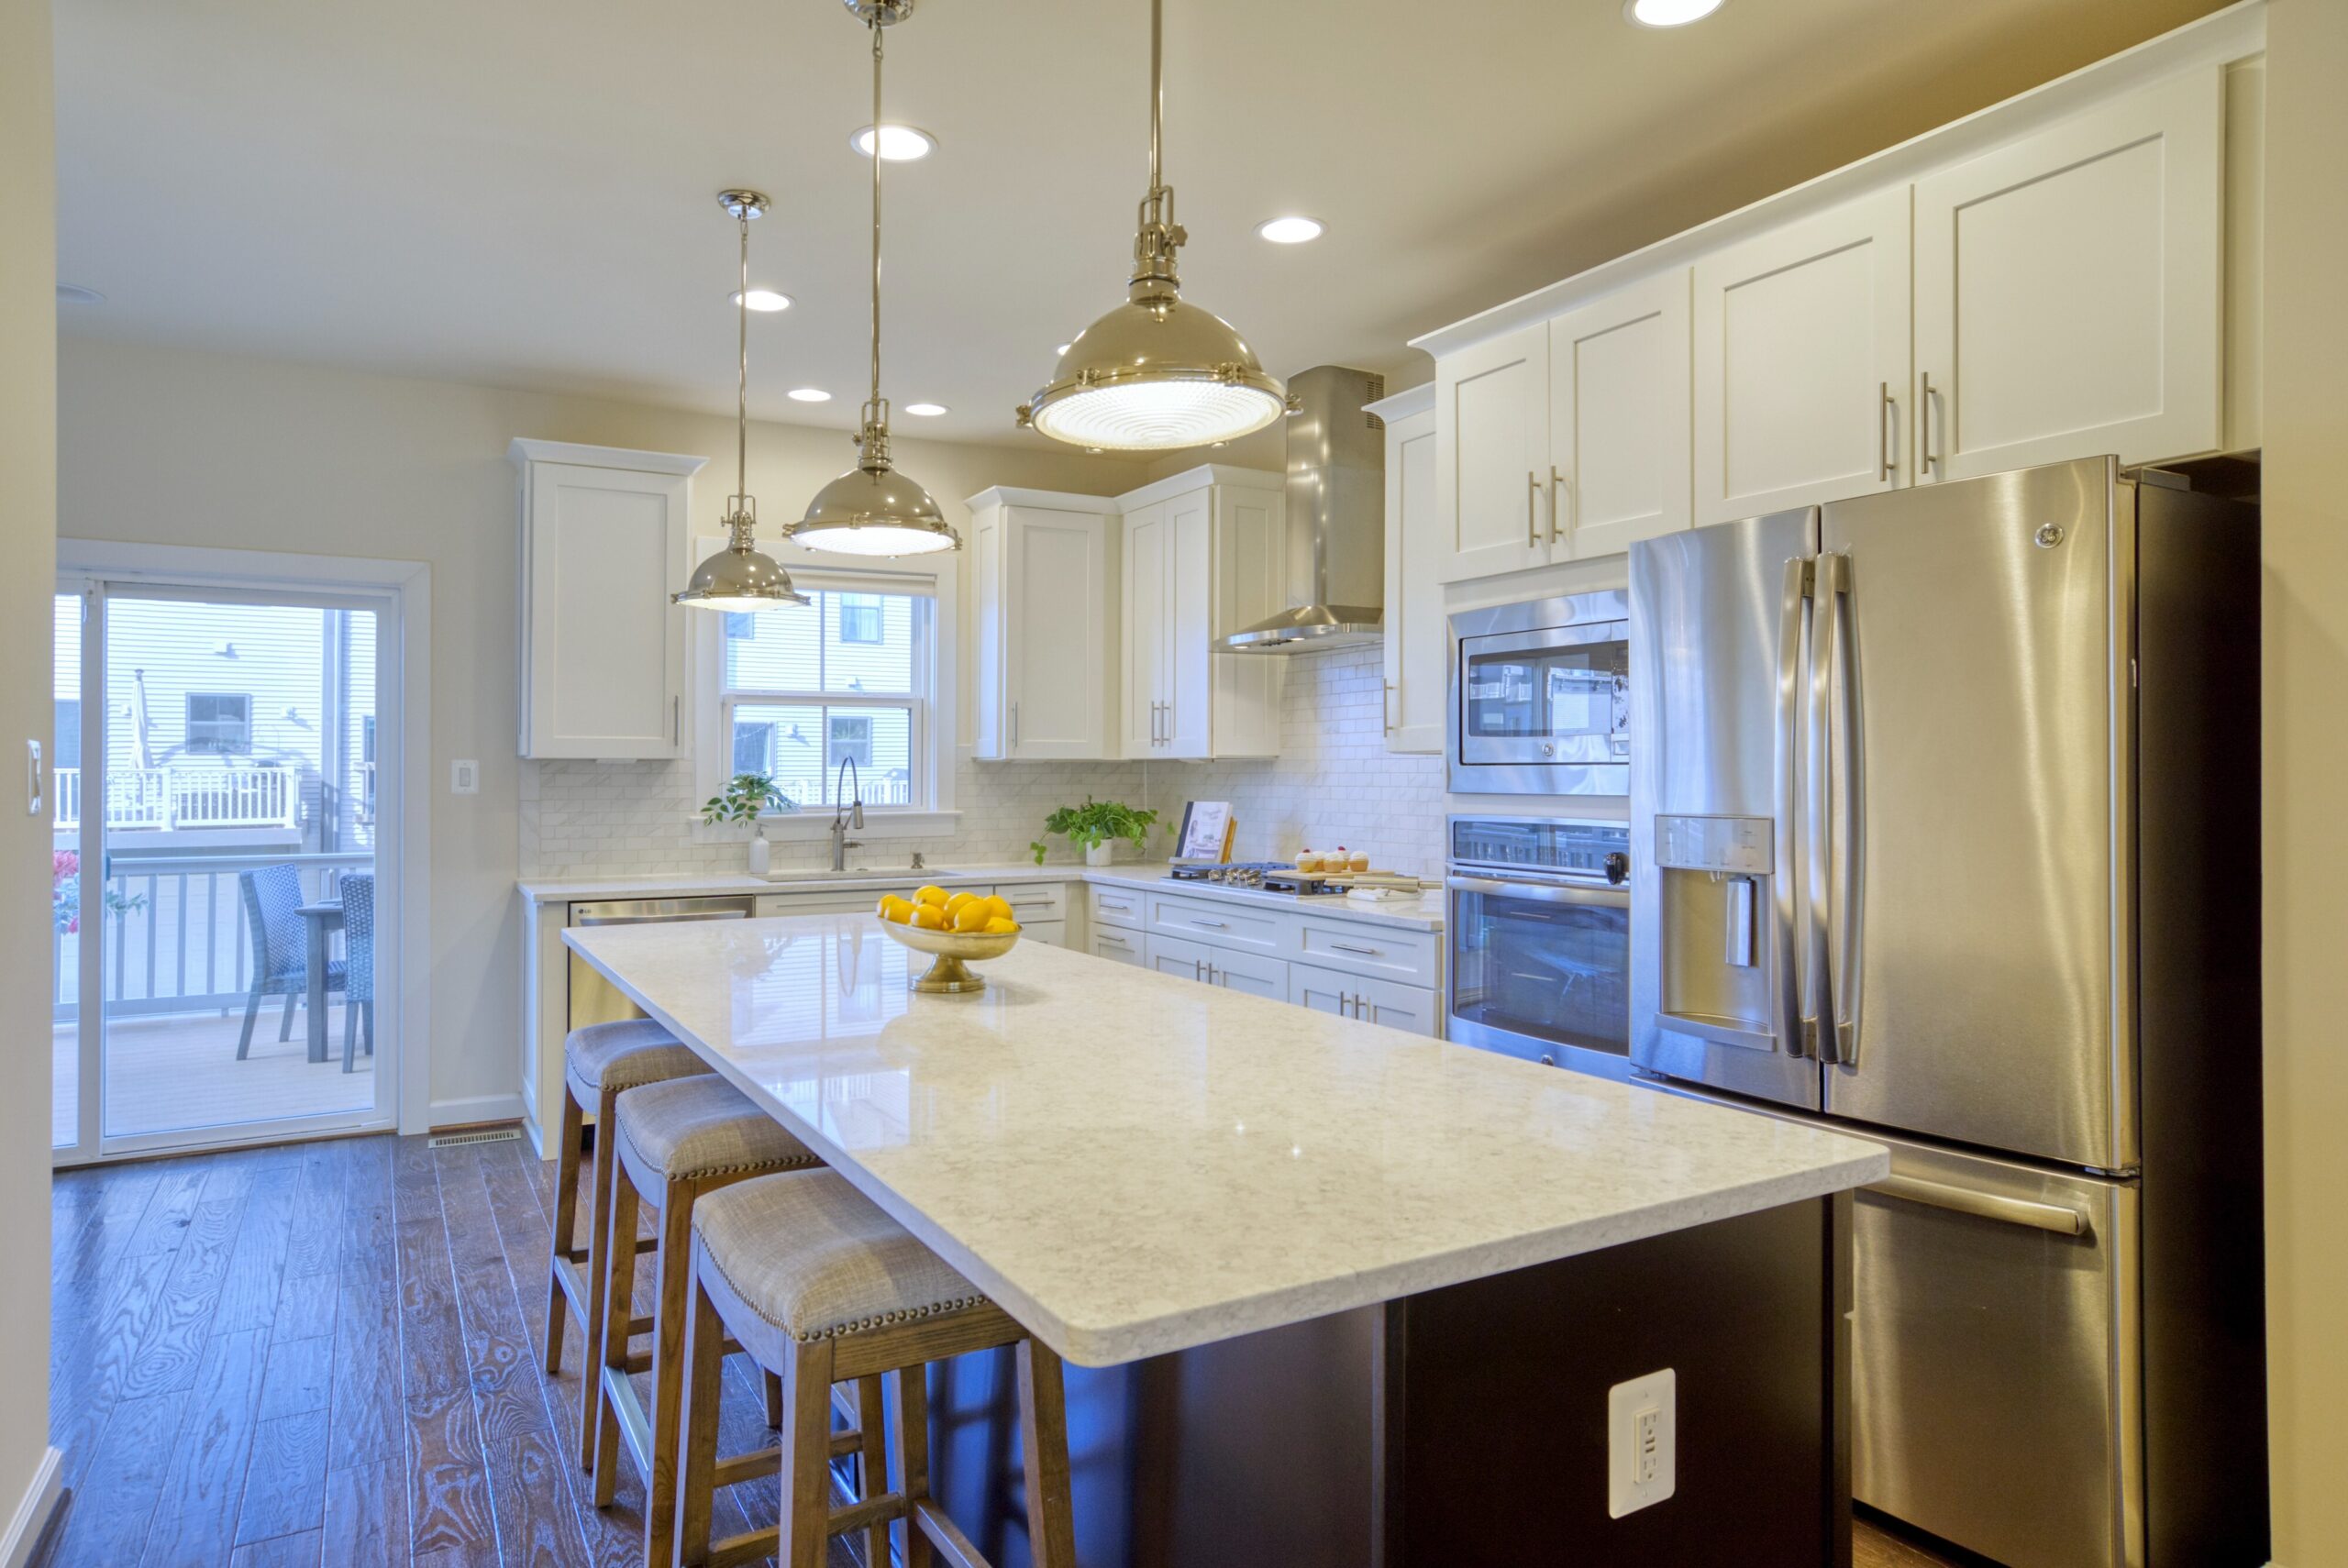 Professional interior photo of 3165 Virginia Bluebell Ct, Fairfax - showing the white kitchen and large island from an angle with view towards the rear deck